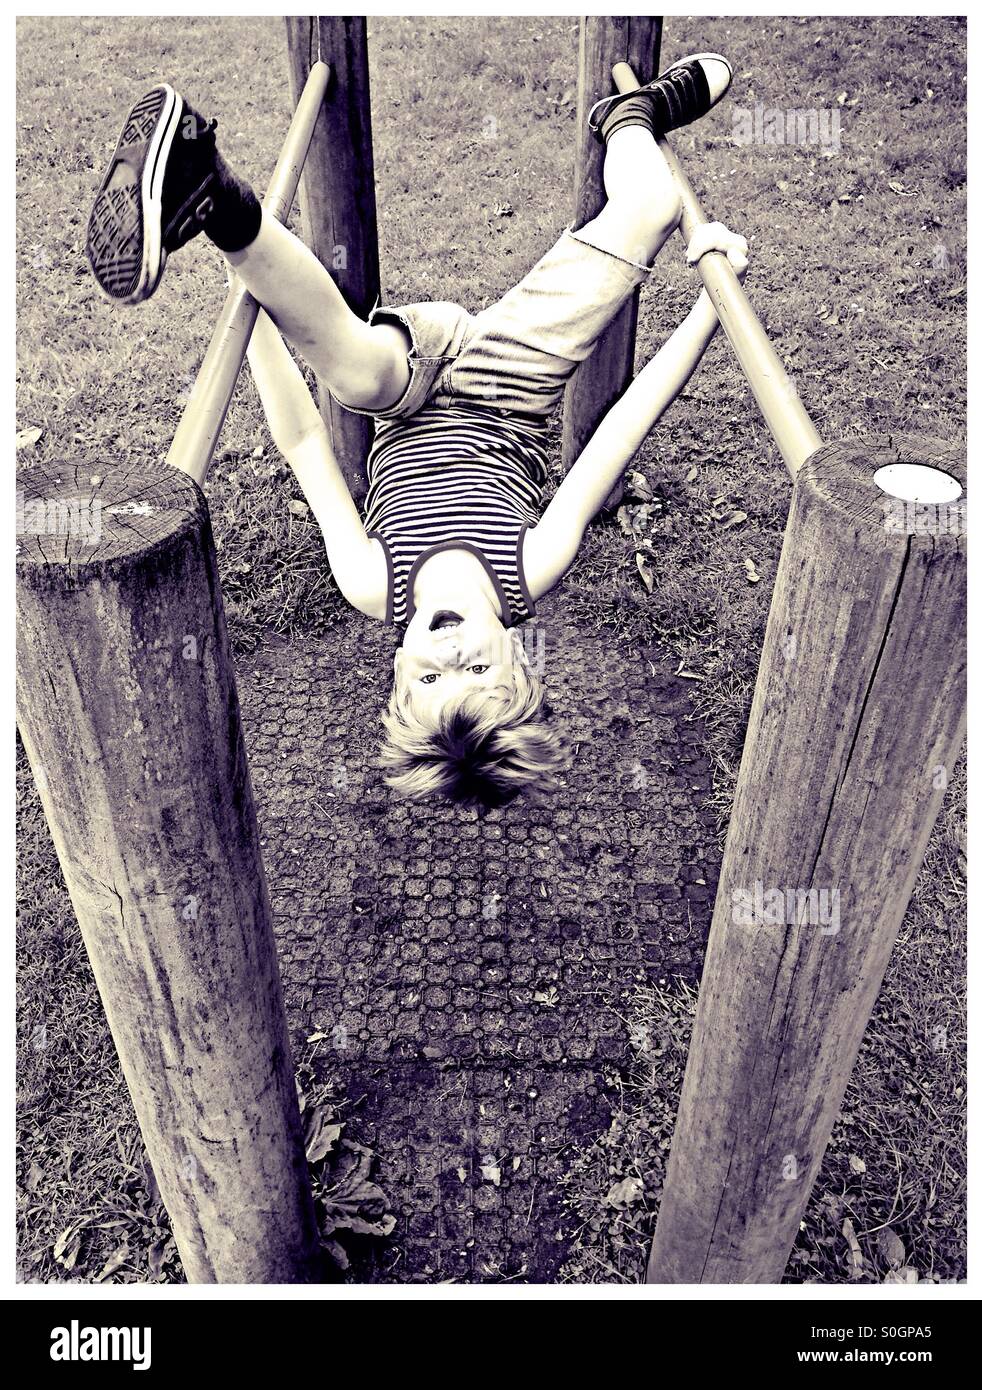 Boy in a playground Stock Photo